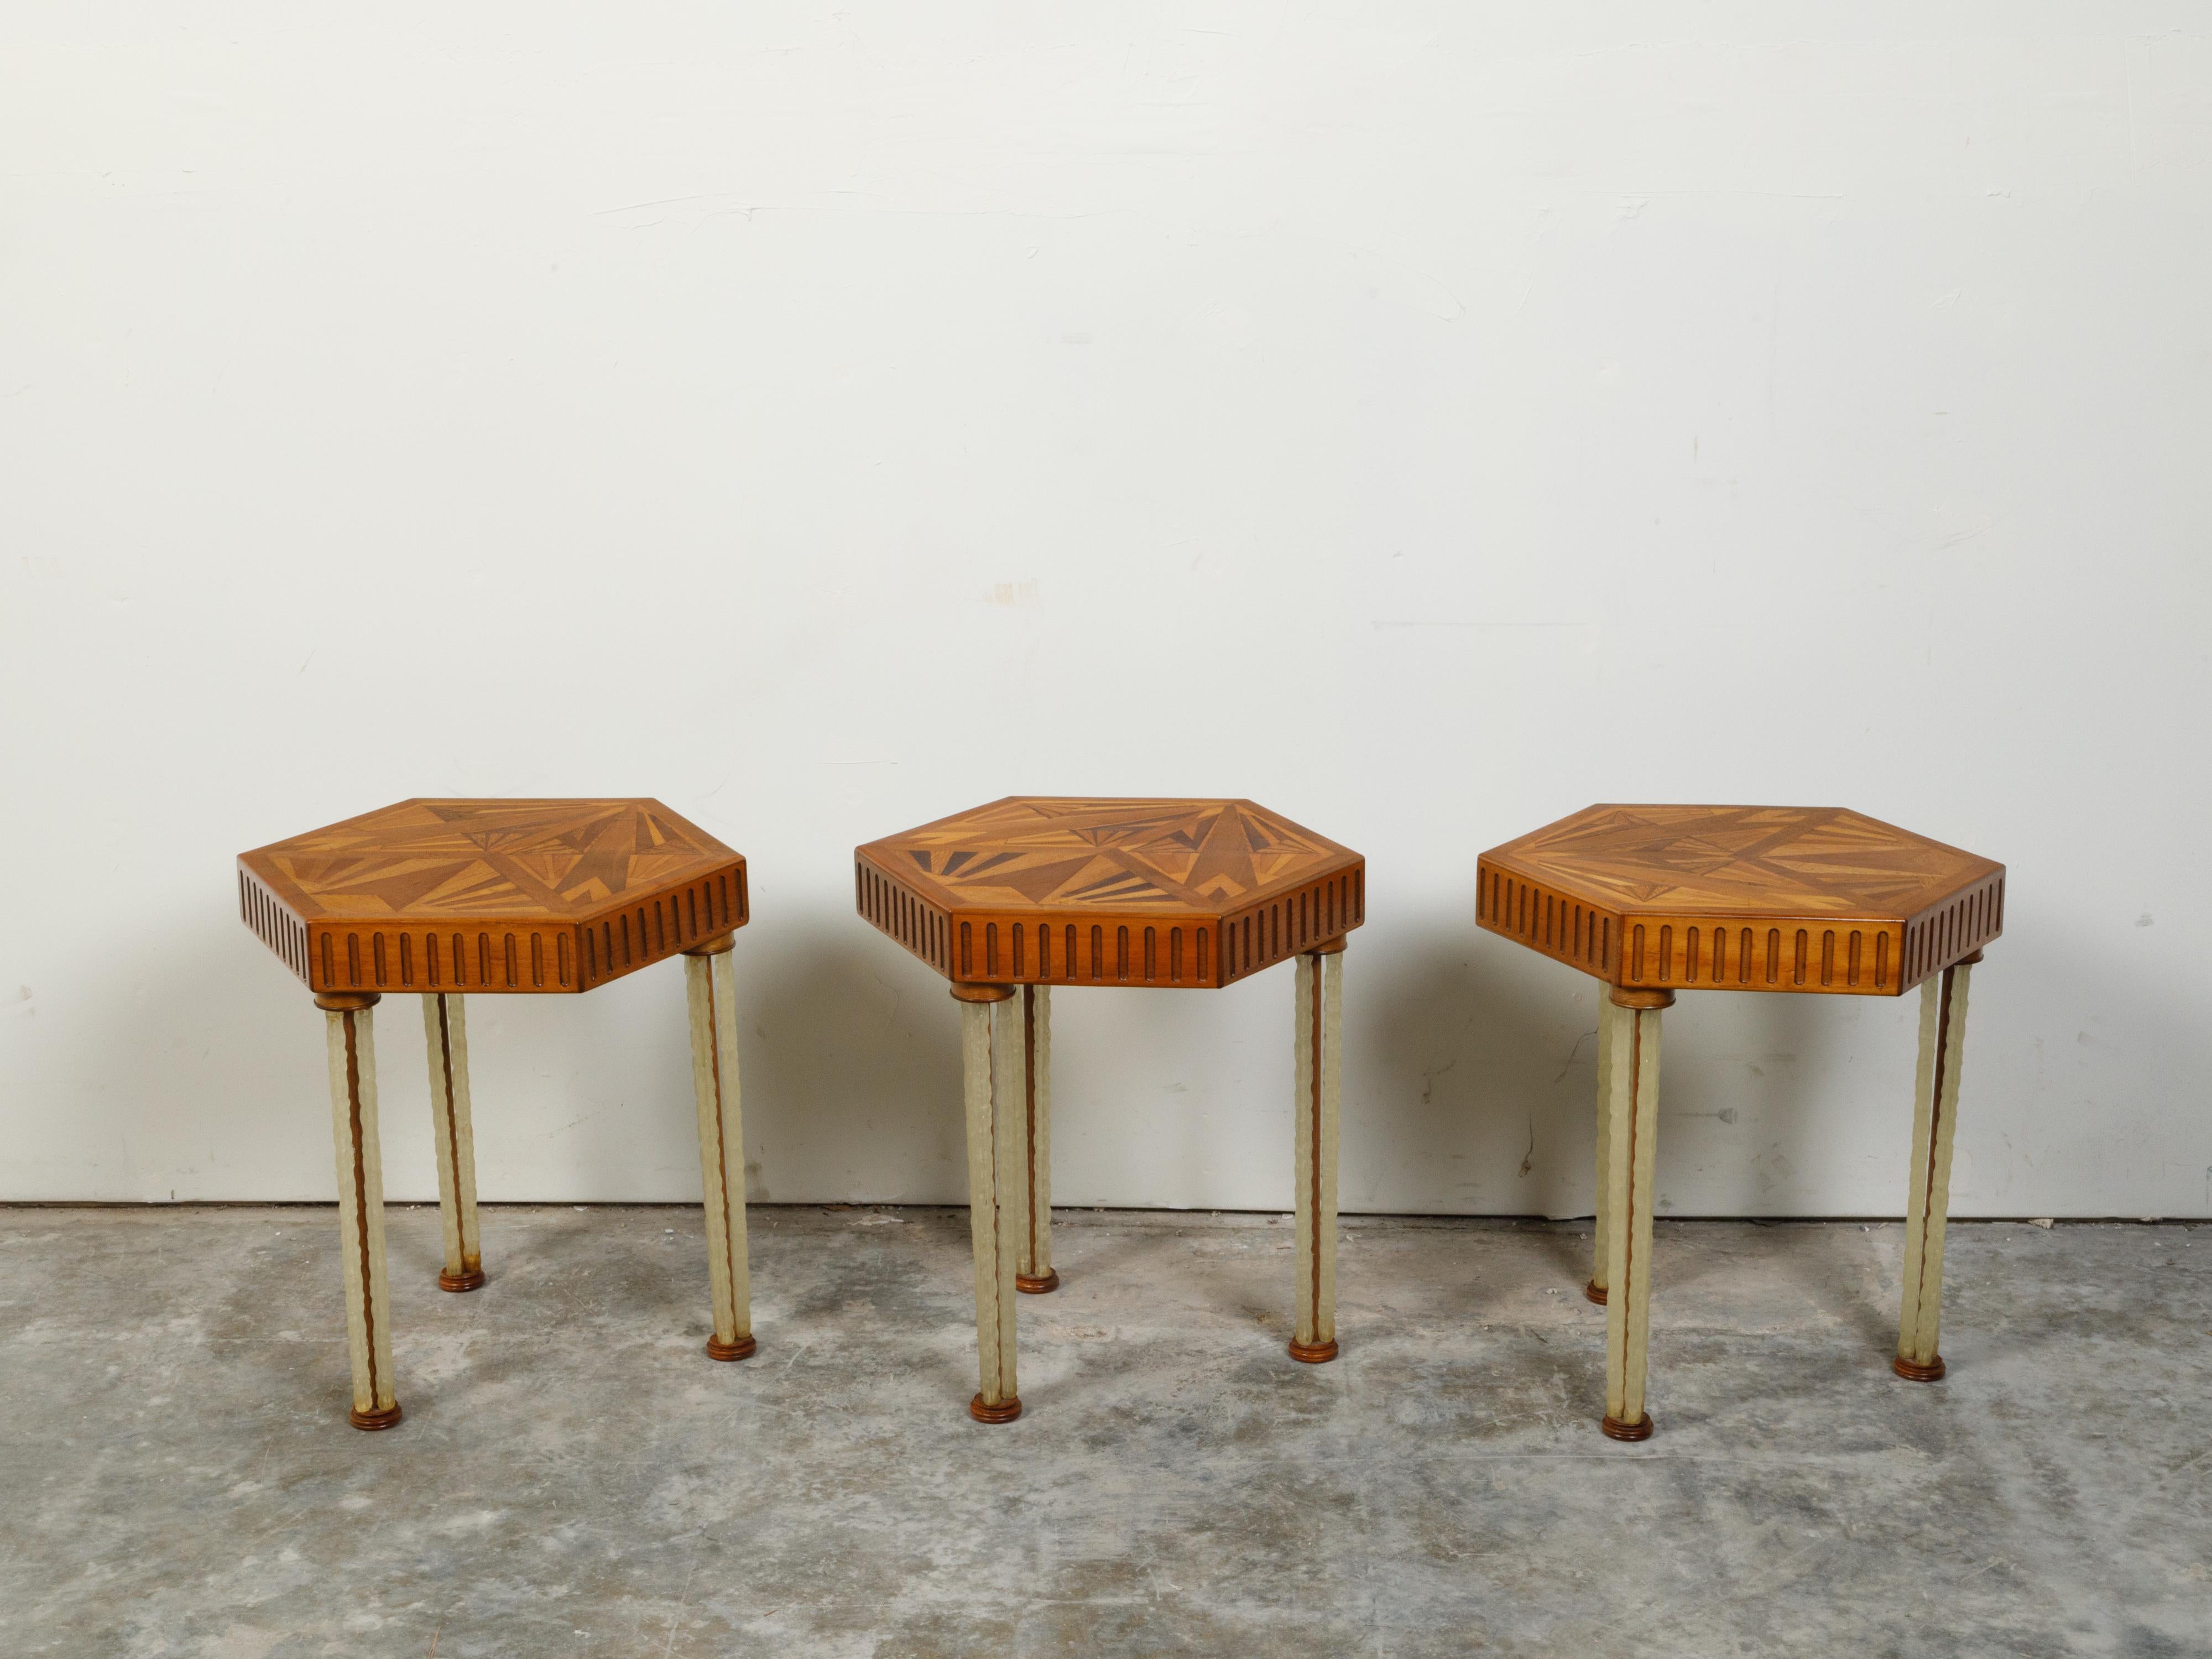 Three Art Deco side tables from the mid 20th century, with hexagonal marquetry tops and lucite legs, priced and sold $3,750 each. Created during the first half of the 20th century, these Art Deco side tables capture our attention with their